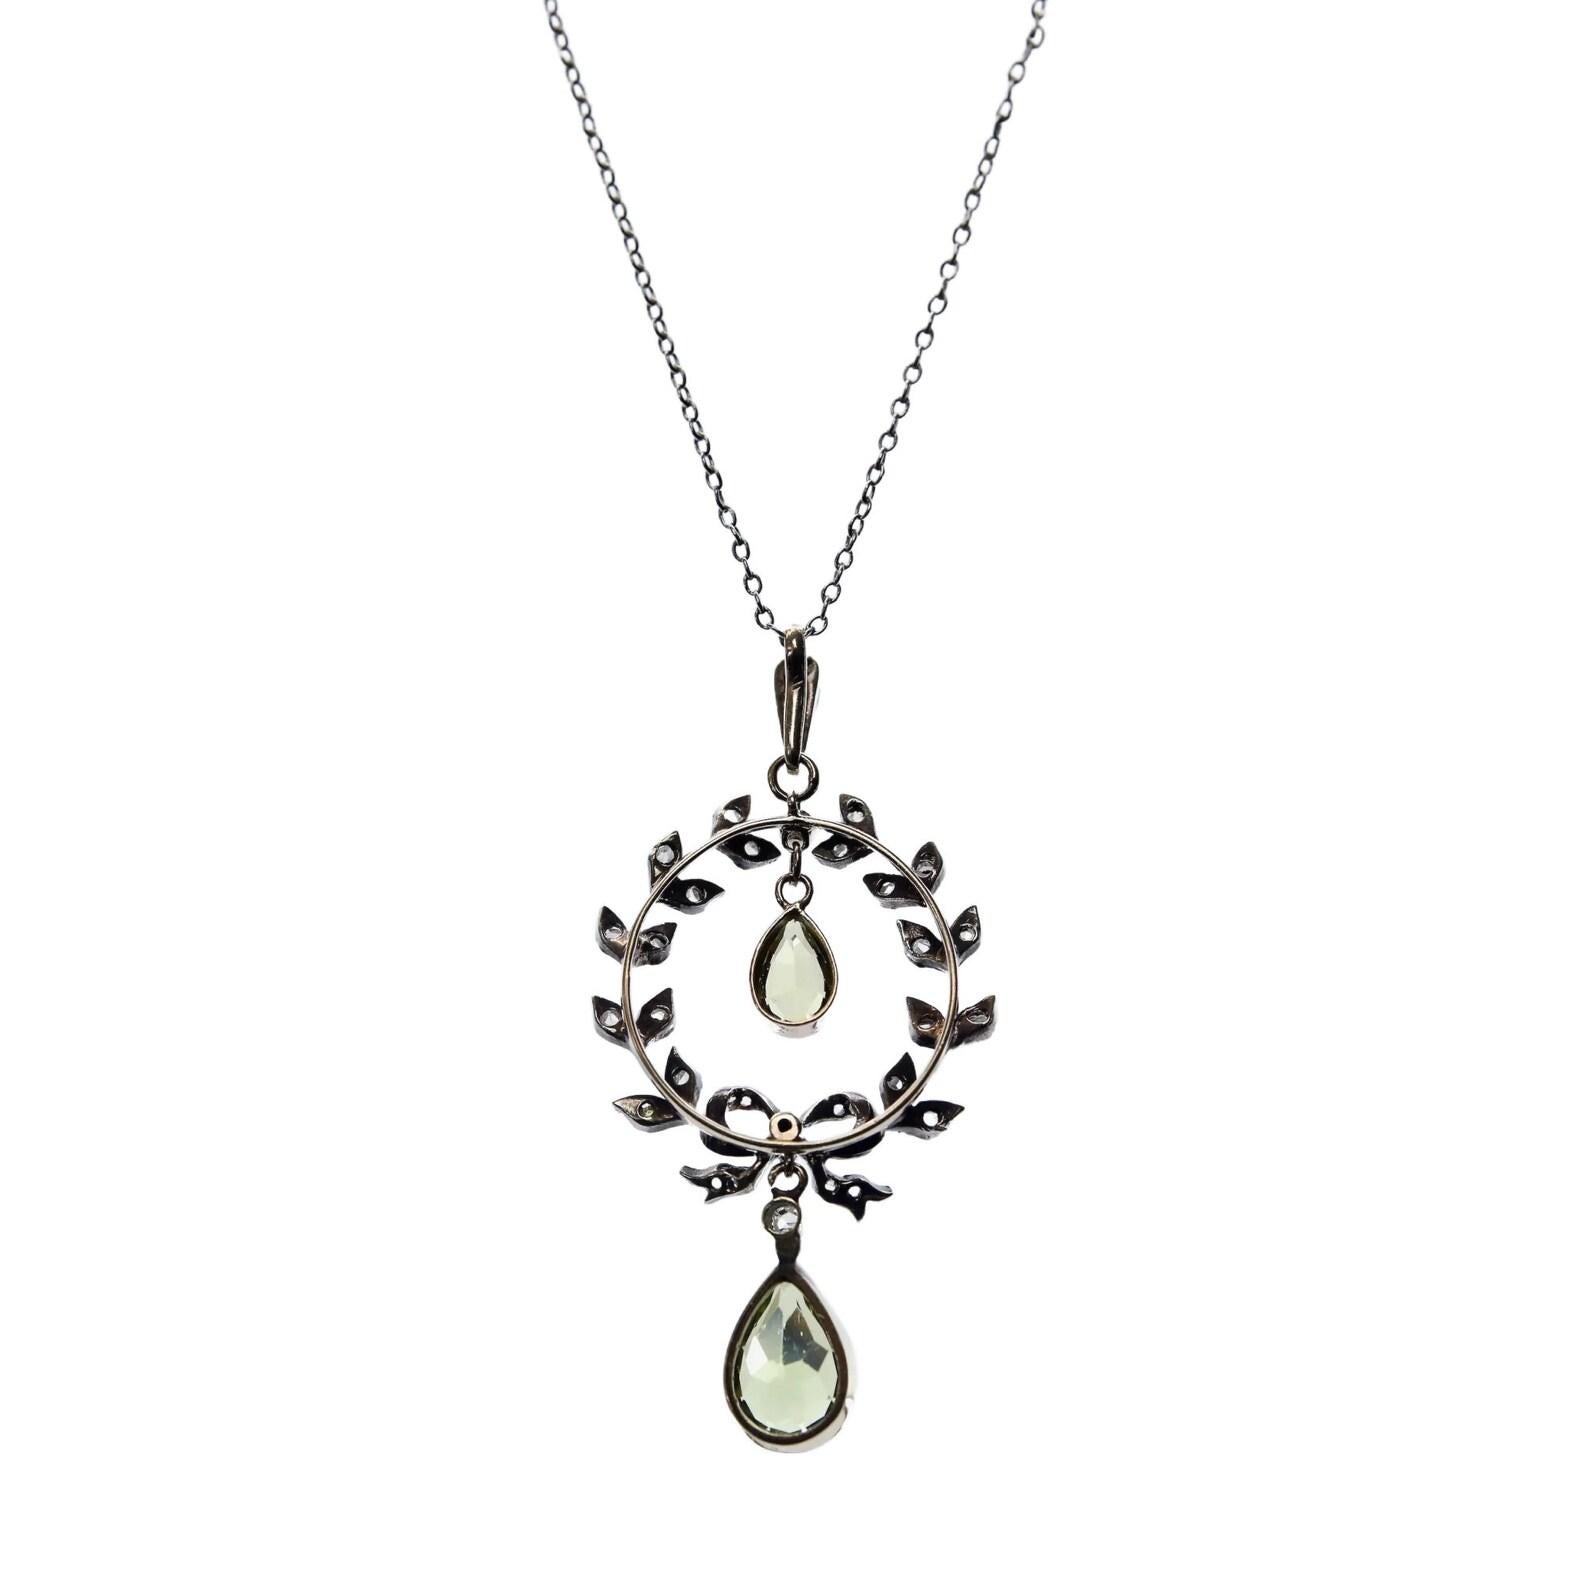 An Edwardian period peridot, diamond, and pearl pendant in platinum and 18 karat yellow gold. Designed as a diamond set platinum wreath, this pendant is centered by two pear shaped peridot's. Set in 18 karat yellow gold bezels complete with